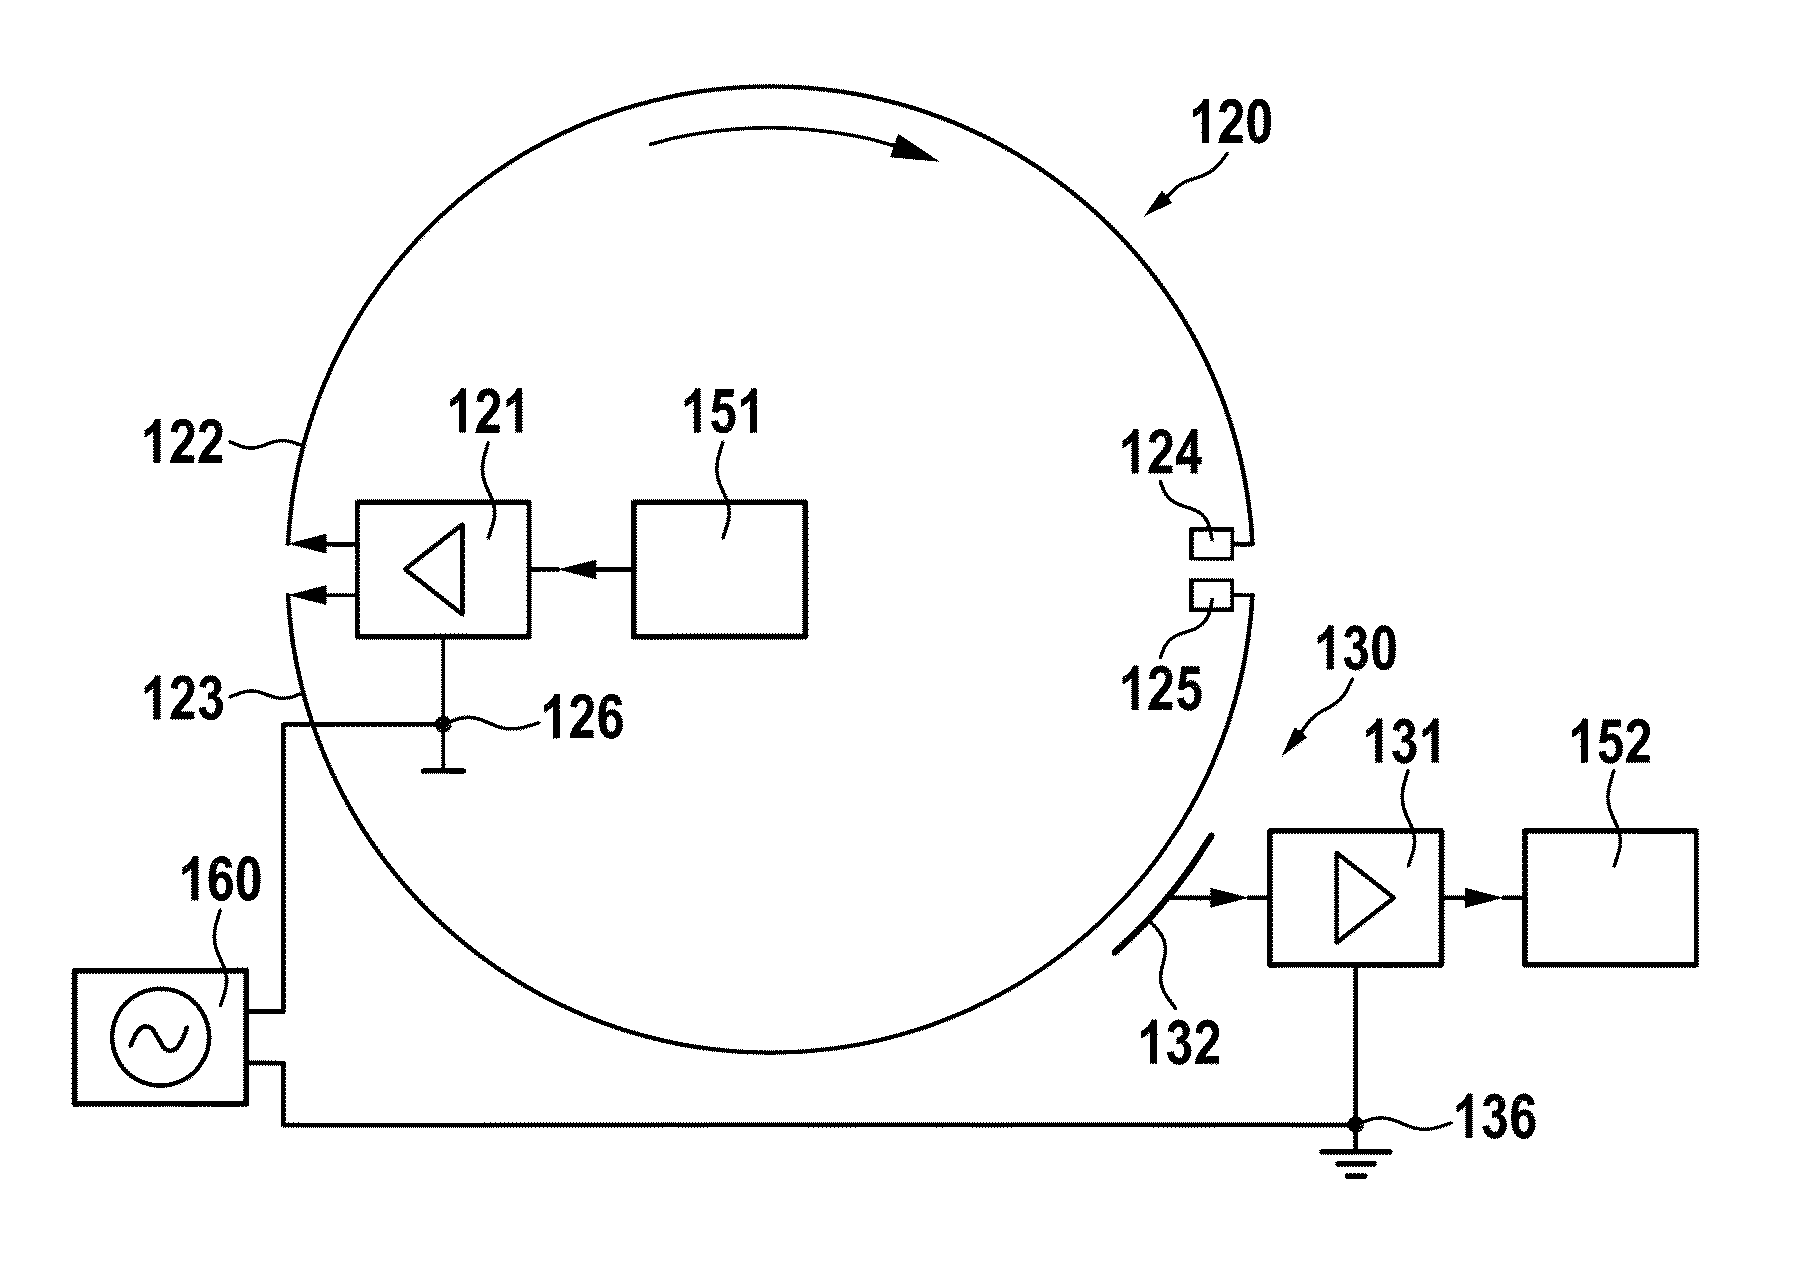 Method and Device for the Adjustment of Contactless Data Links